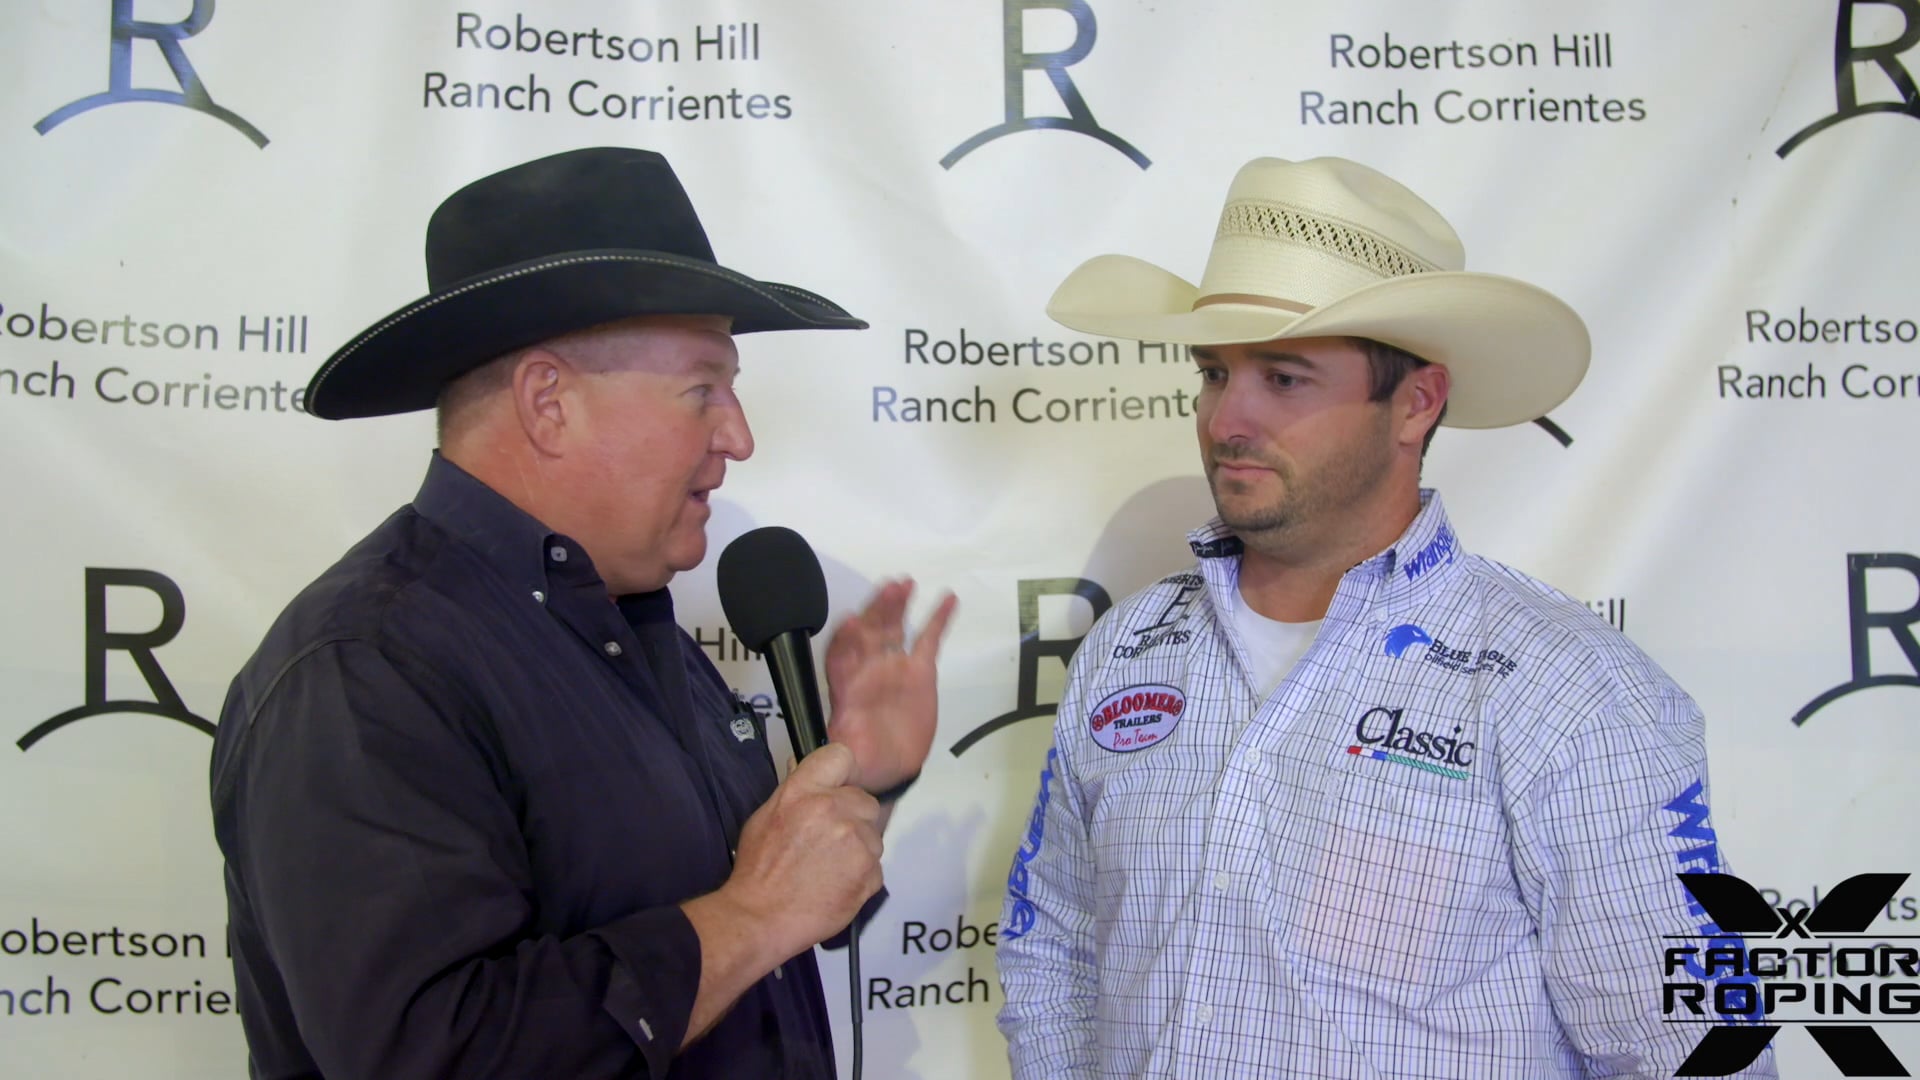 FREE Pre Roping Interview with Austin Robertson